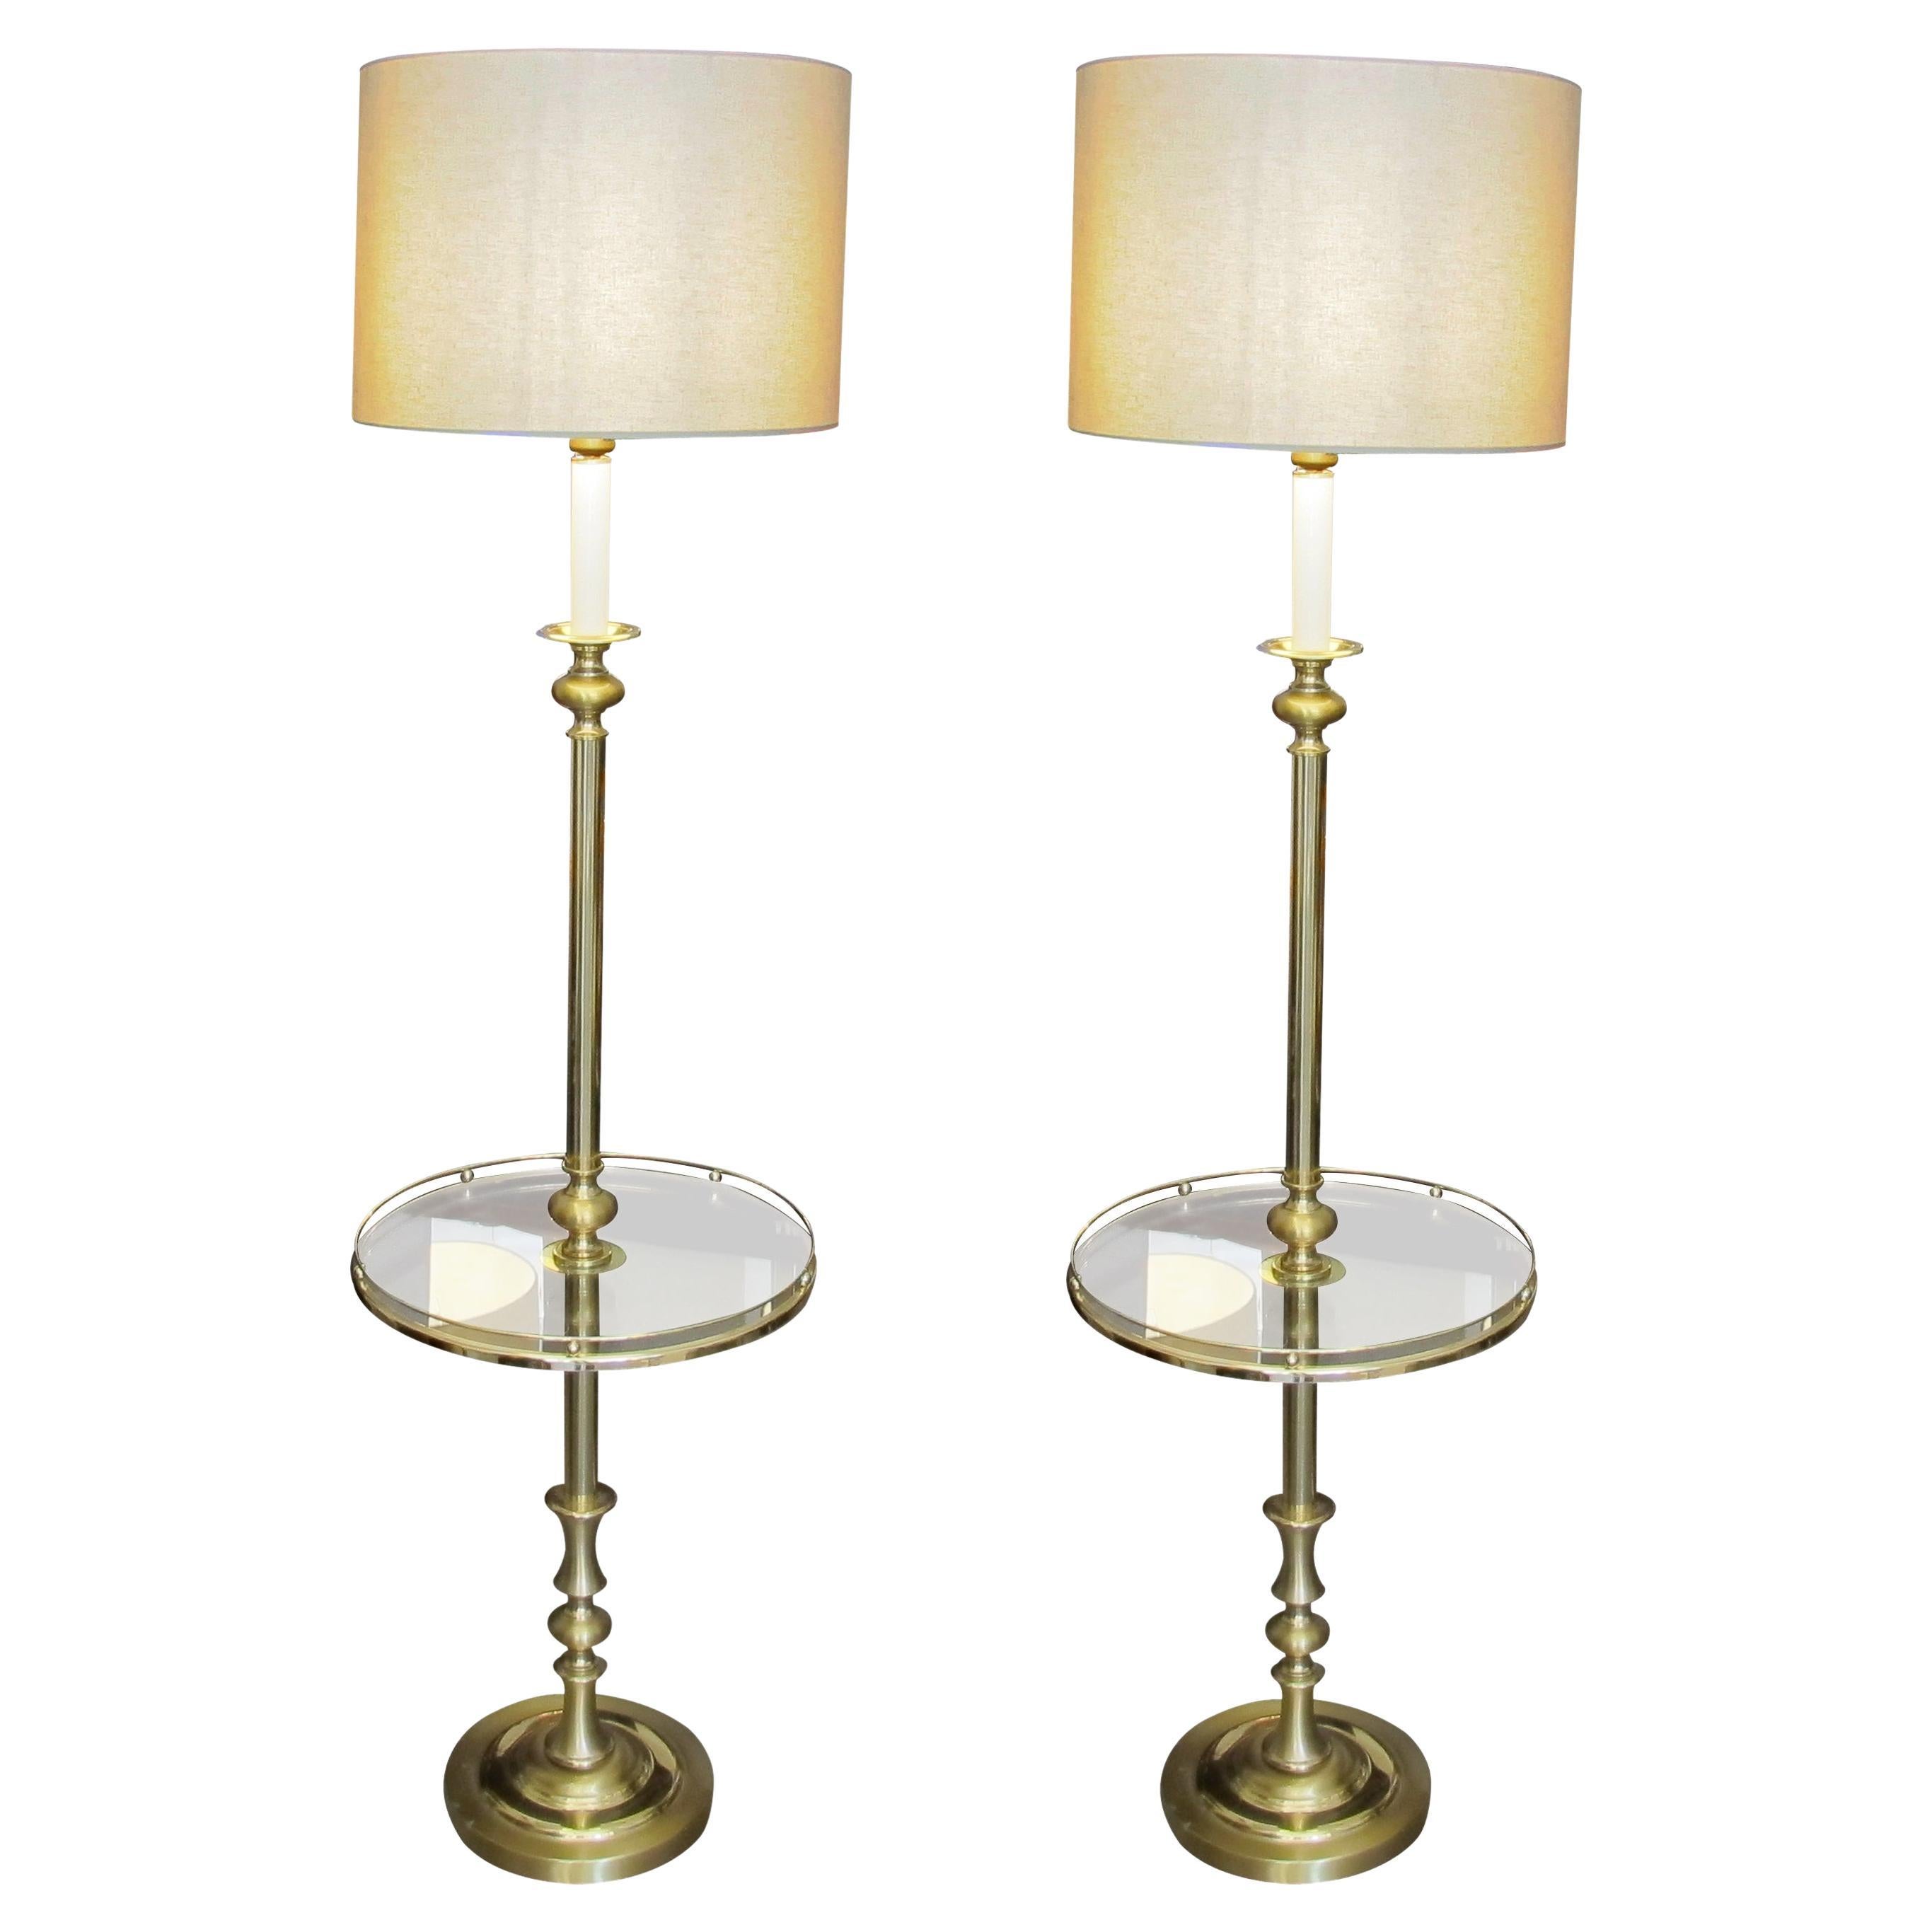 At the heart of these lamps lies a unique feature; a round clear glass encased within a meticulously crafted brass frame. With its pristine transparency, the clear glass enhances the lamp's aesthetic allure but also serves as a functional surface.